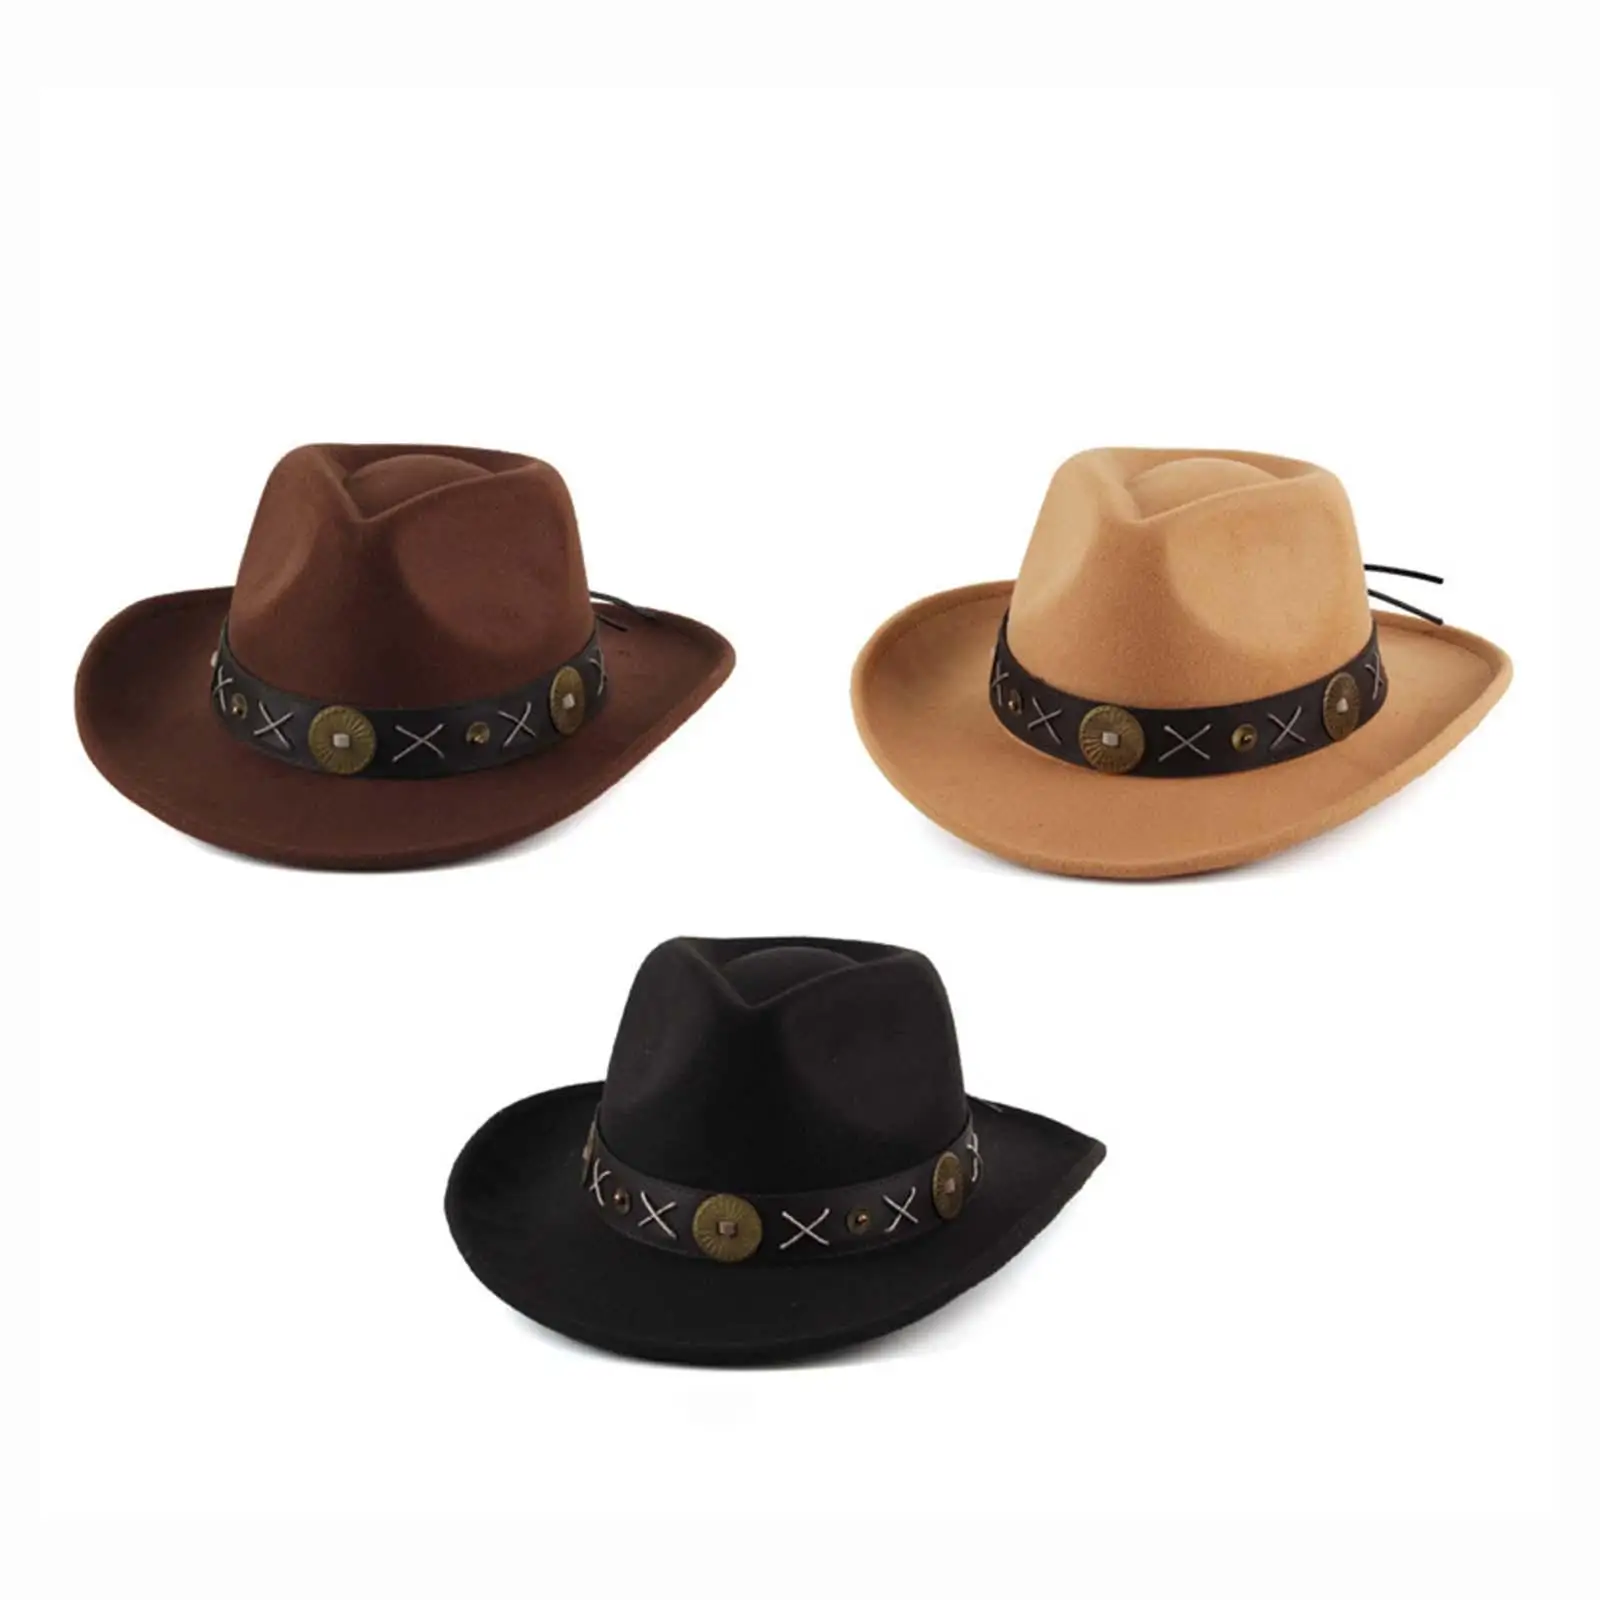 Western Cowboy Hat Novelty Comfortable Wide Brim Breathable Decor Cowgirl Hat for Men Fall Costume Accessories Winter Travel